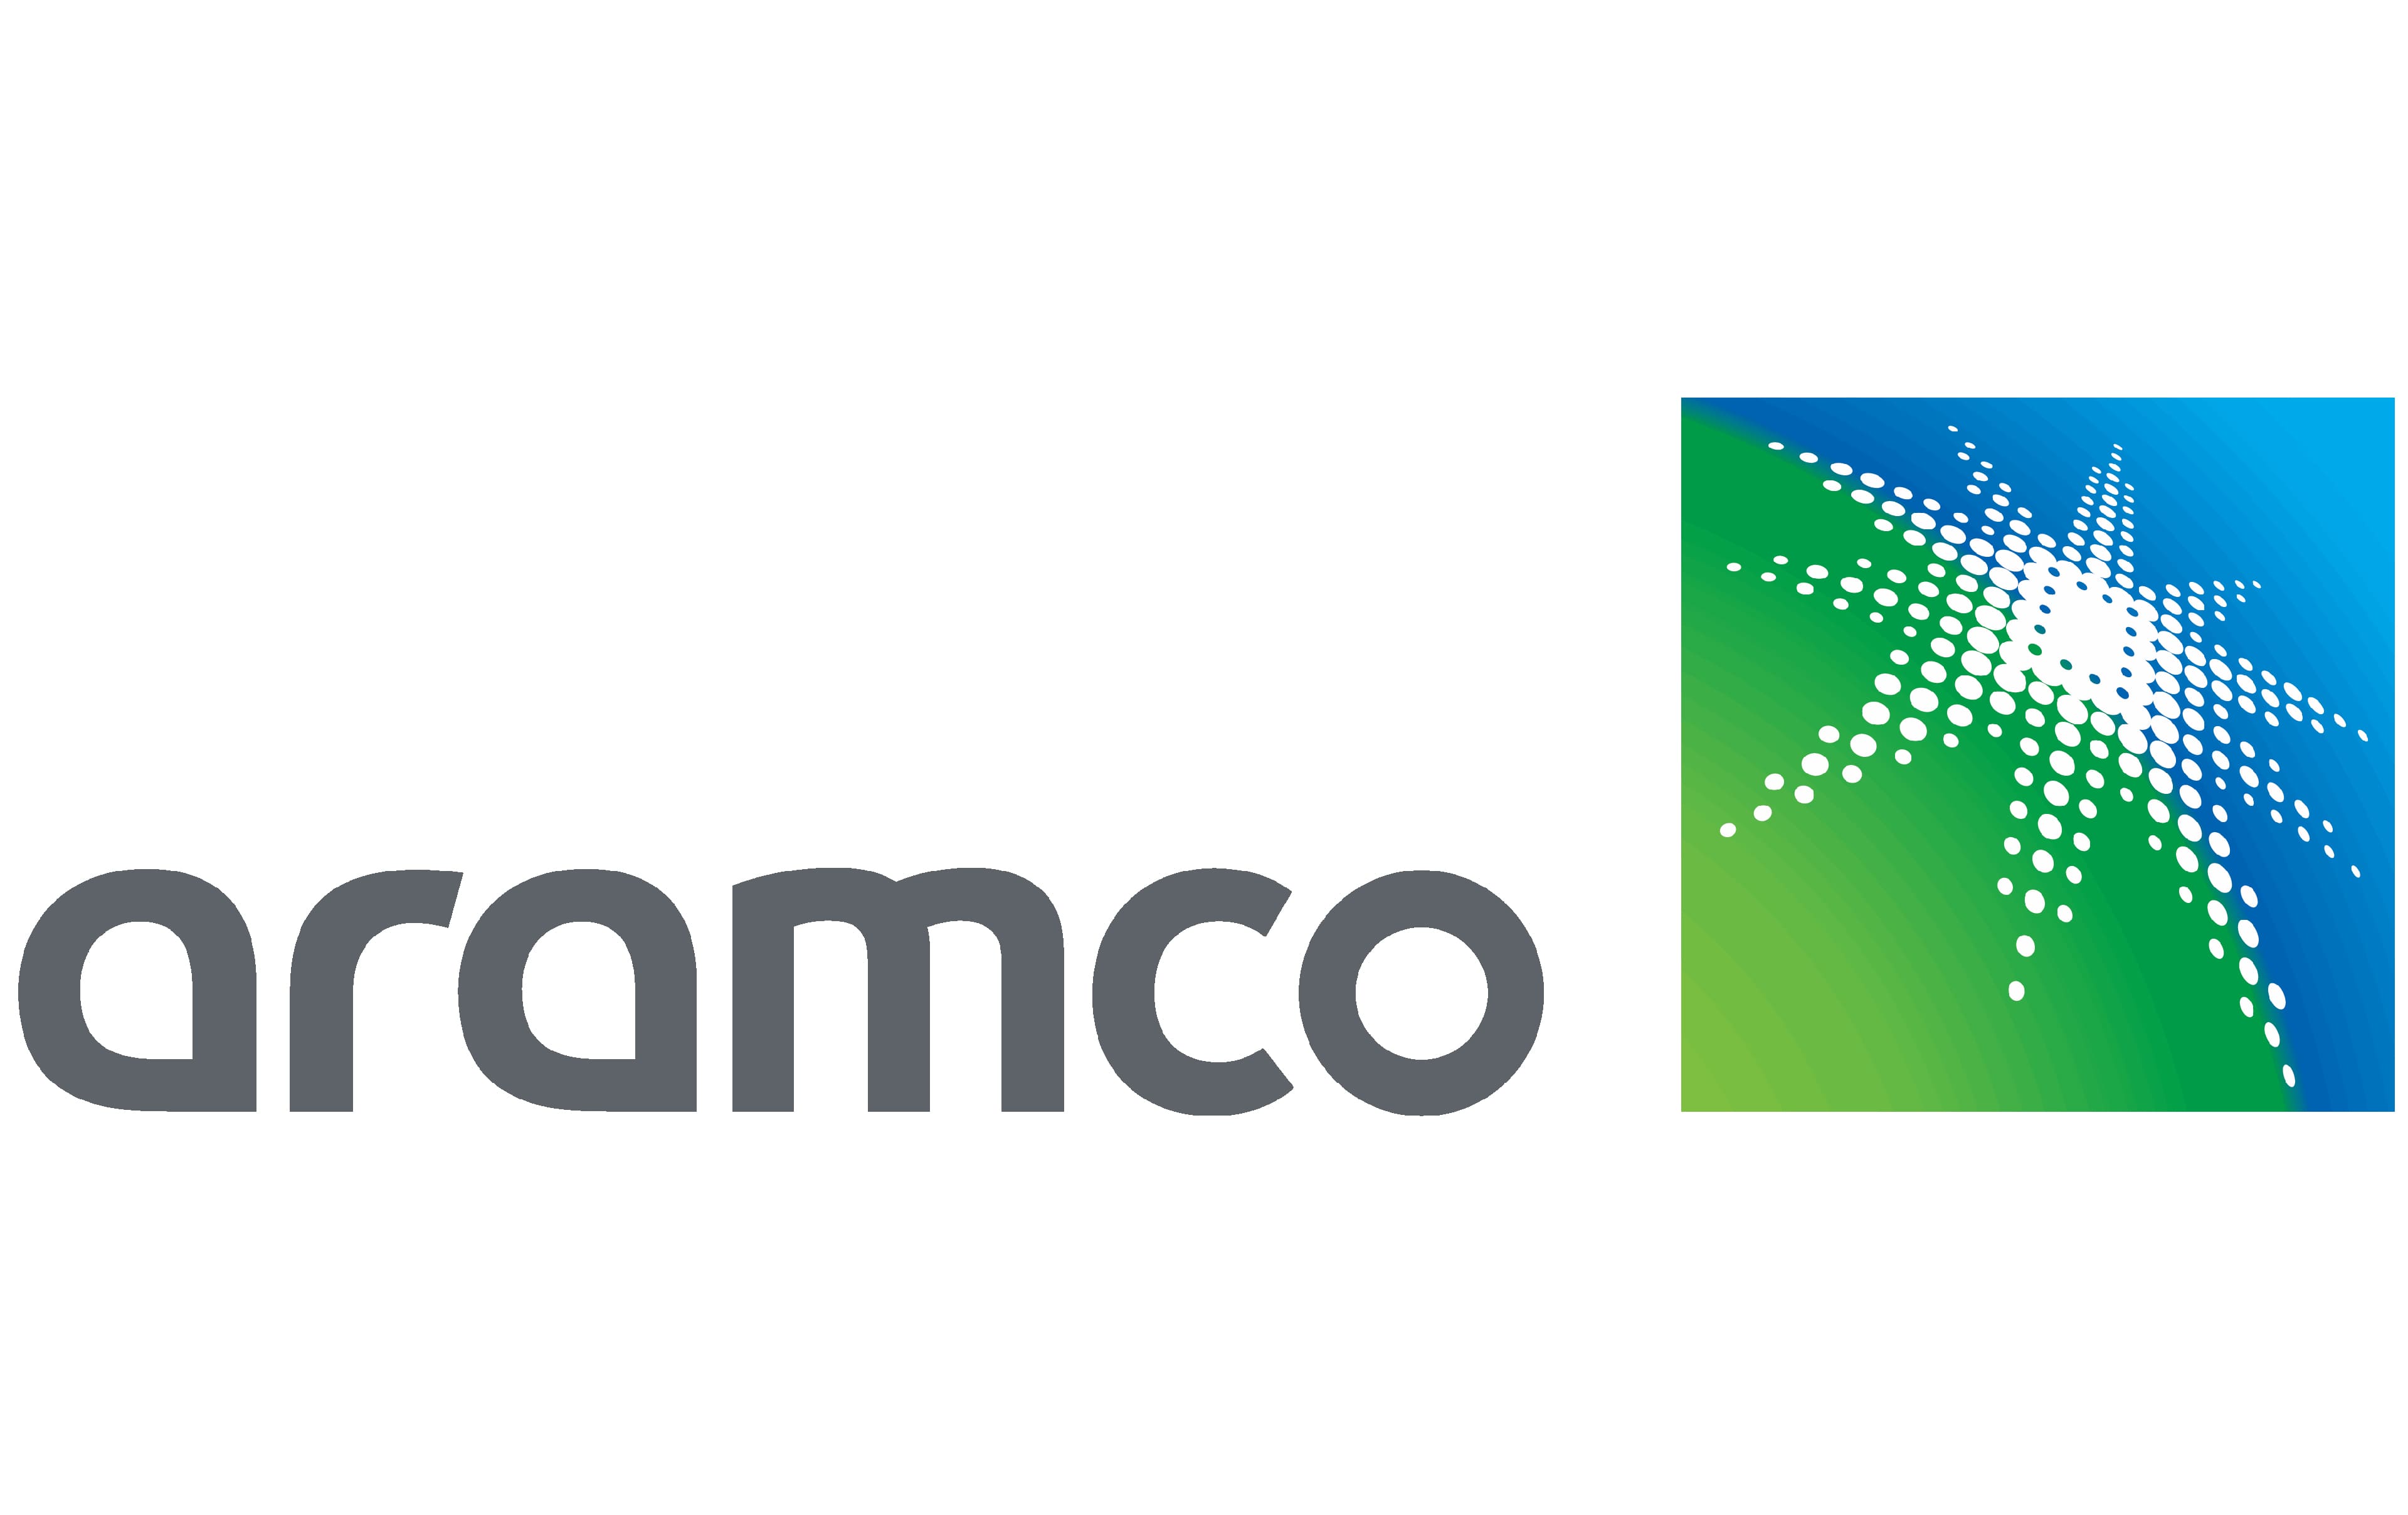 Saudi Aramco to buy 40% of oil products distributor in Pakistan